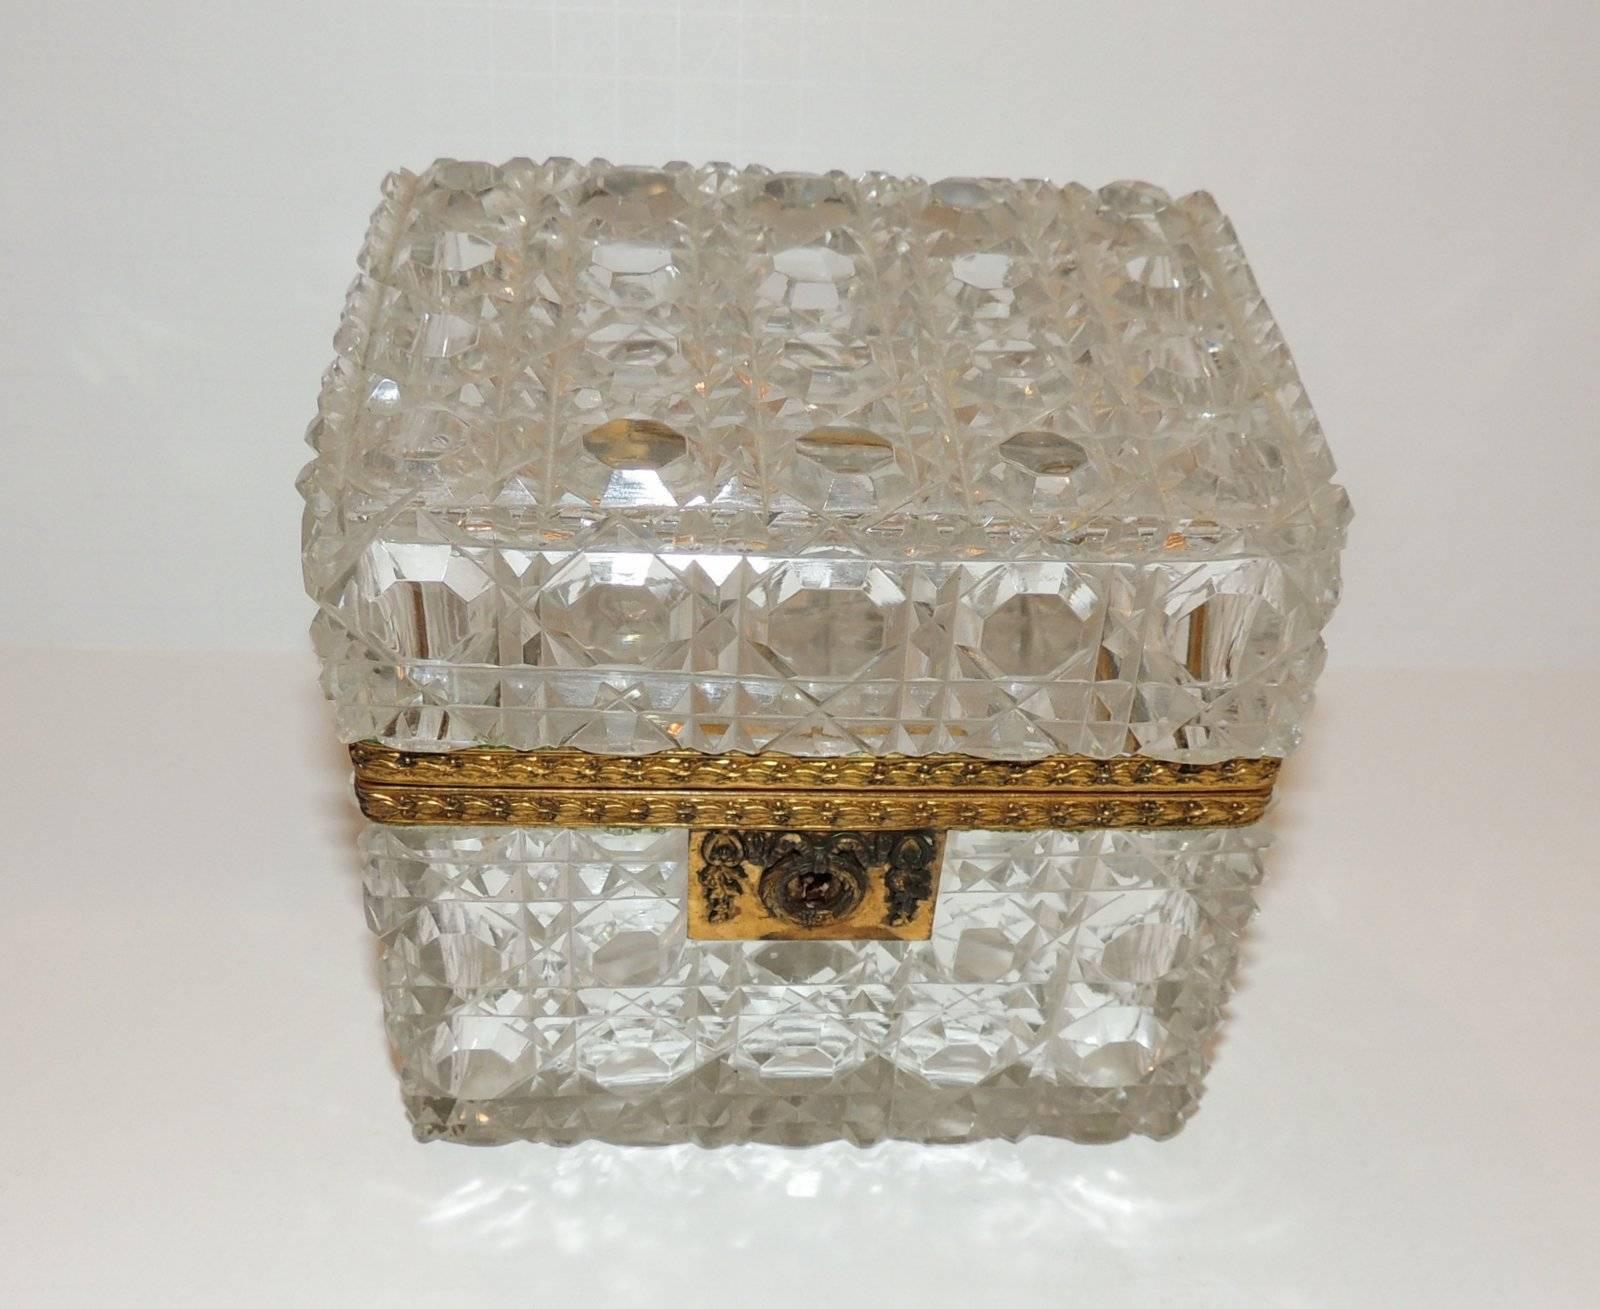 A wonderful French faceted cut crystal casket with engraved scroll bronze ormolu mountings with wreath draped keyhole.

Measures: 5.25" L x 5.25" H x 4" D.